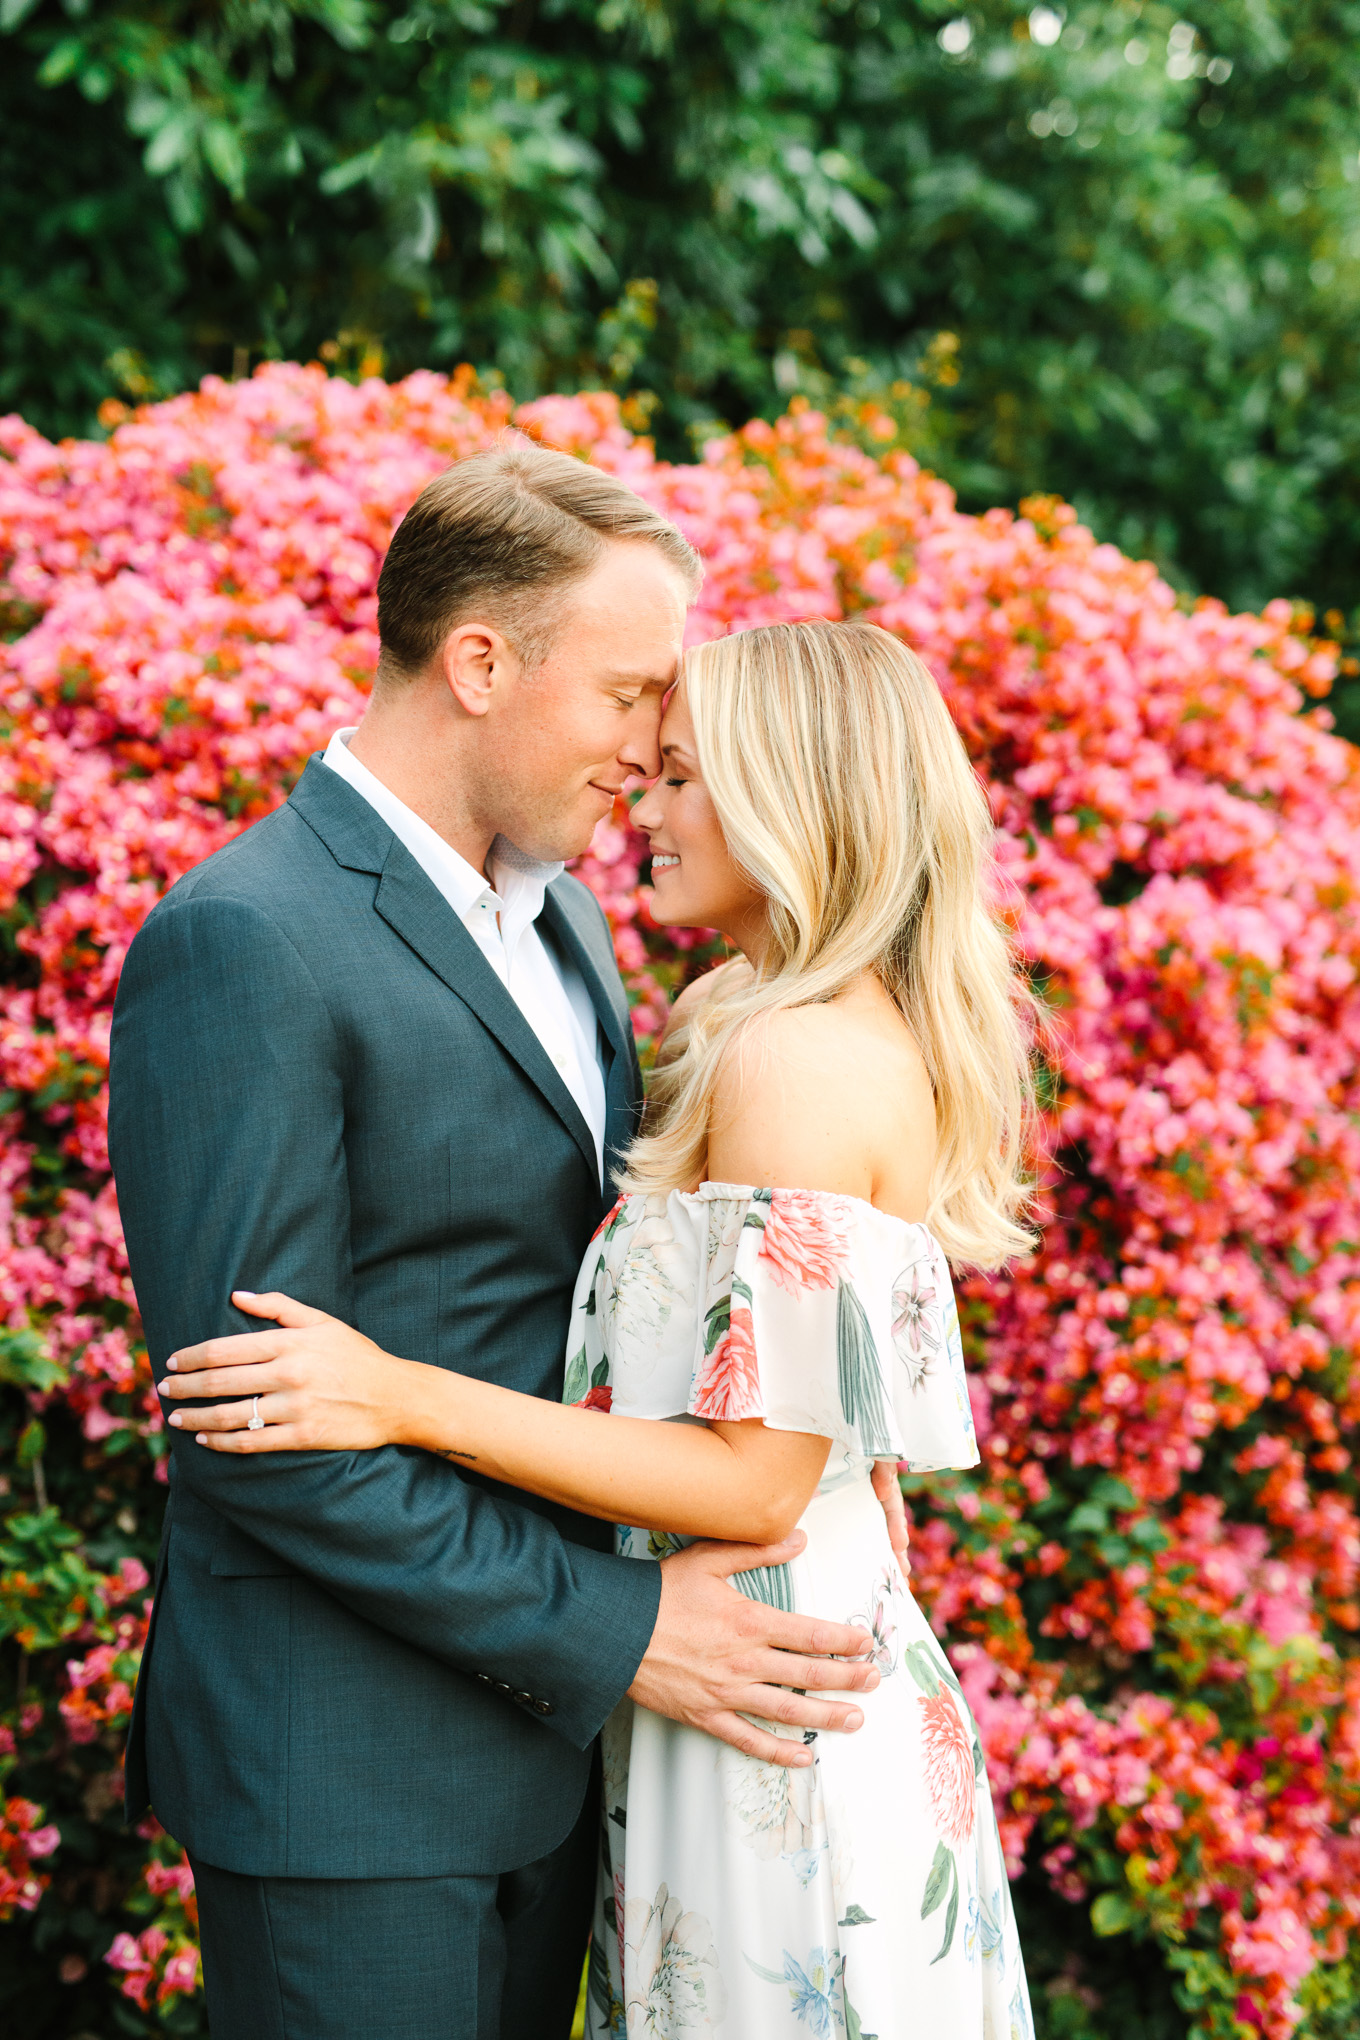 Couple embracing in front of flowers at Quail Ranch Simi Valley | Best Southern California Garden Wedding Venues | Colorful and elevated wedding photography for fun-loving couples | #gardenvenue #weddingvenue #socalweddingvenue #bouquetideas #uniquebouquet   Source: Mary Costa Photography | Los Angeles 